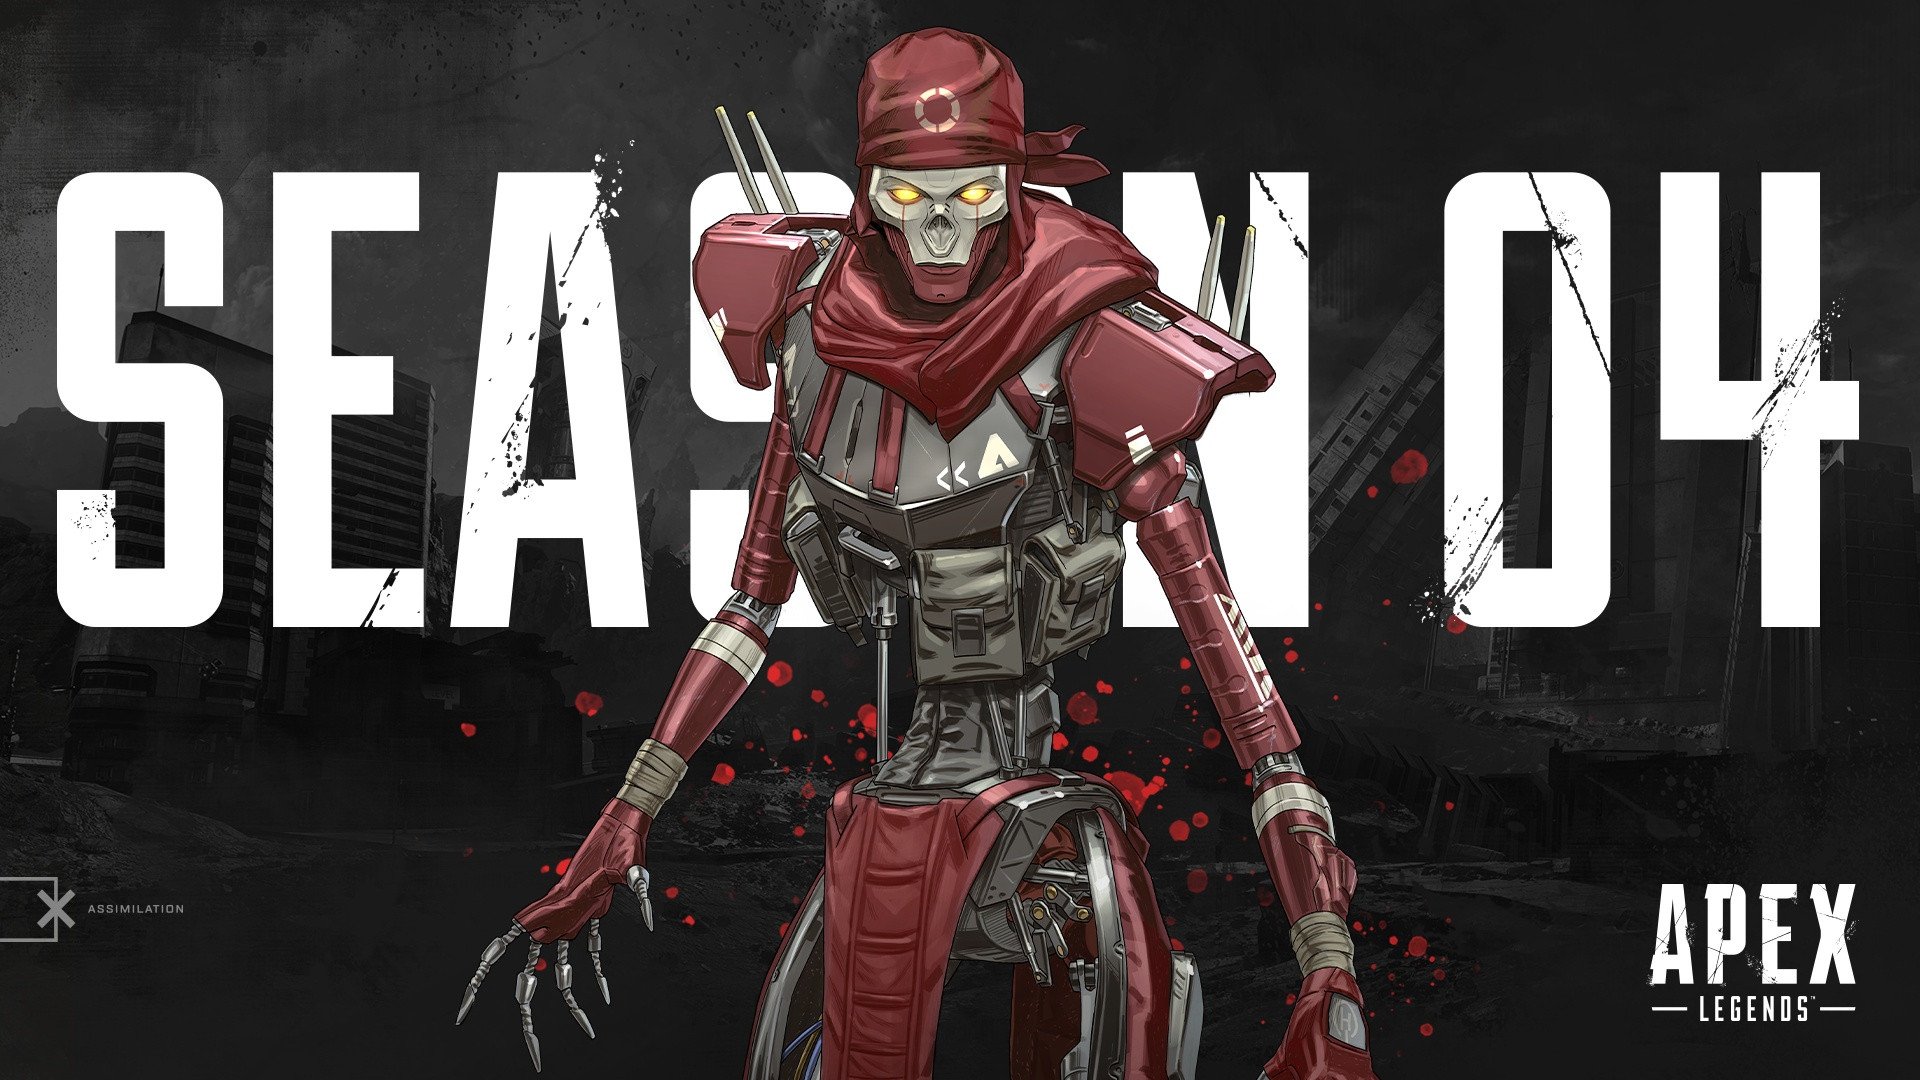 Apex Legends Season 4 – Assimilation Coming February 4 to Xbox One